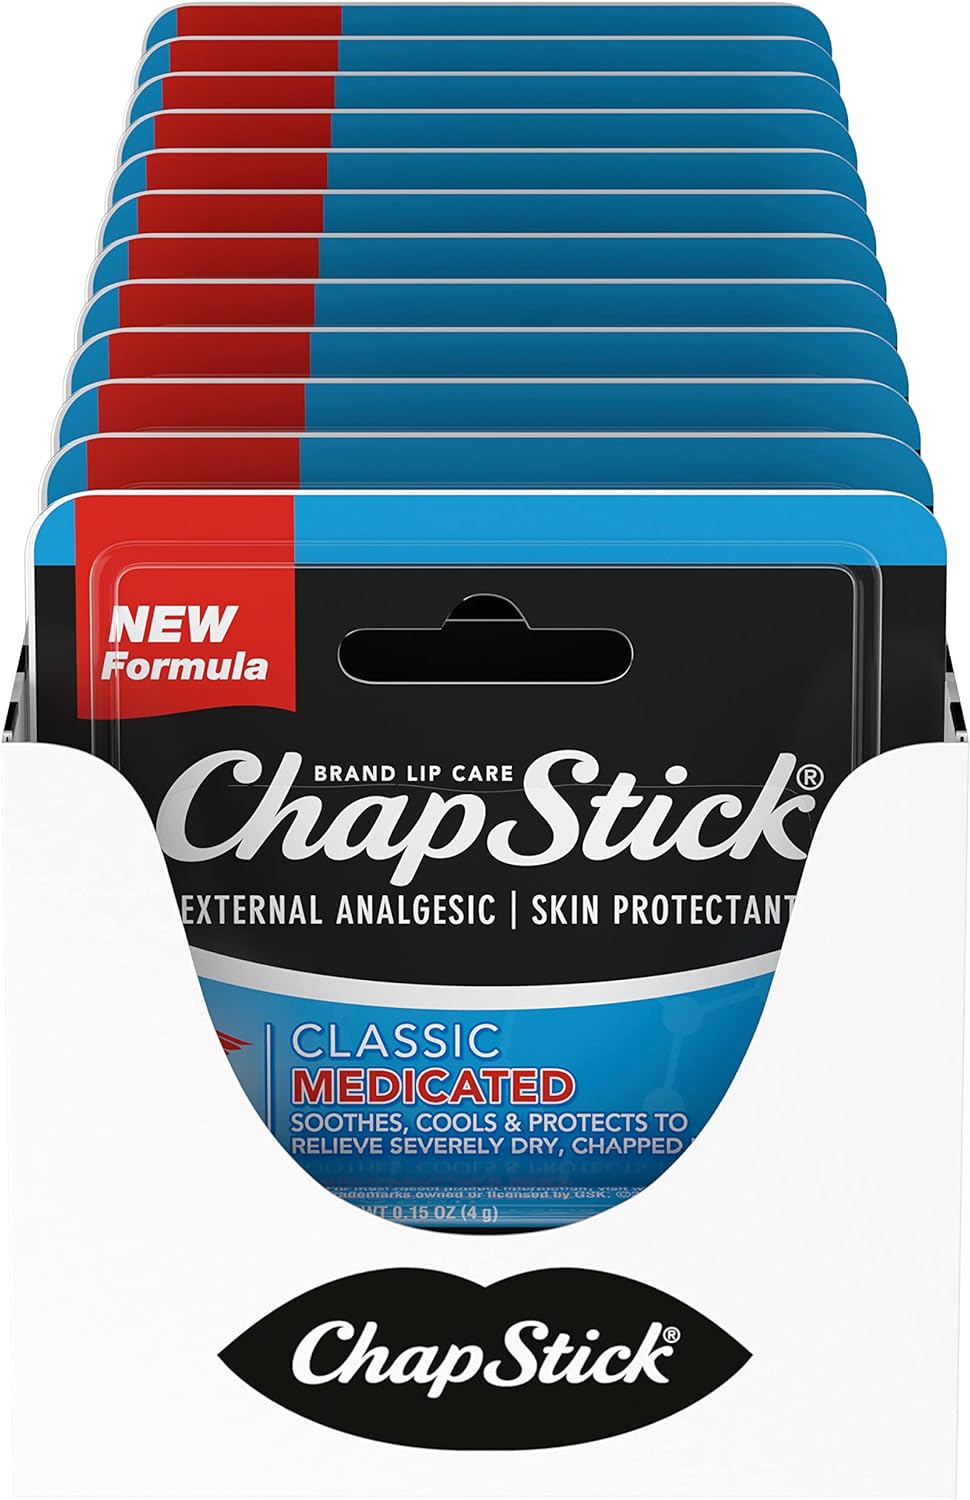 ChapStick Classic Medicated Lip Balm Tubes, Chapped Lips Treatment and Skin Protectant - 0.15x12 Oz